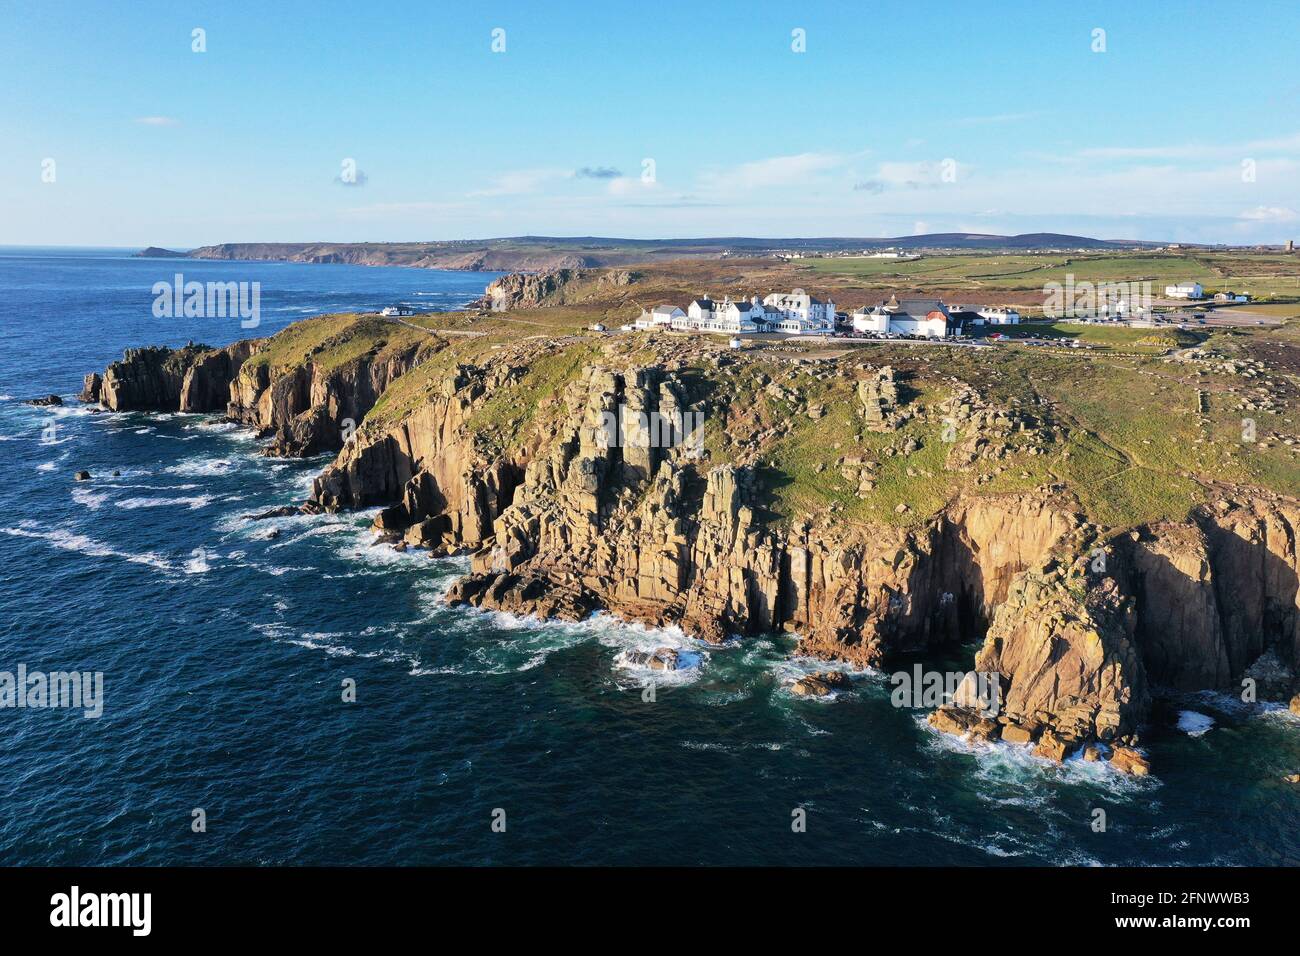 beautiful aerial view of lands end Cornwall with the ocean, cliffs and rugged coastline on a sunny day Stock Photo